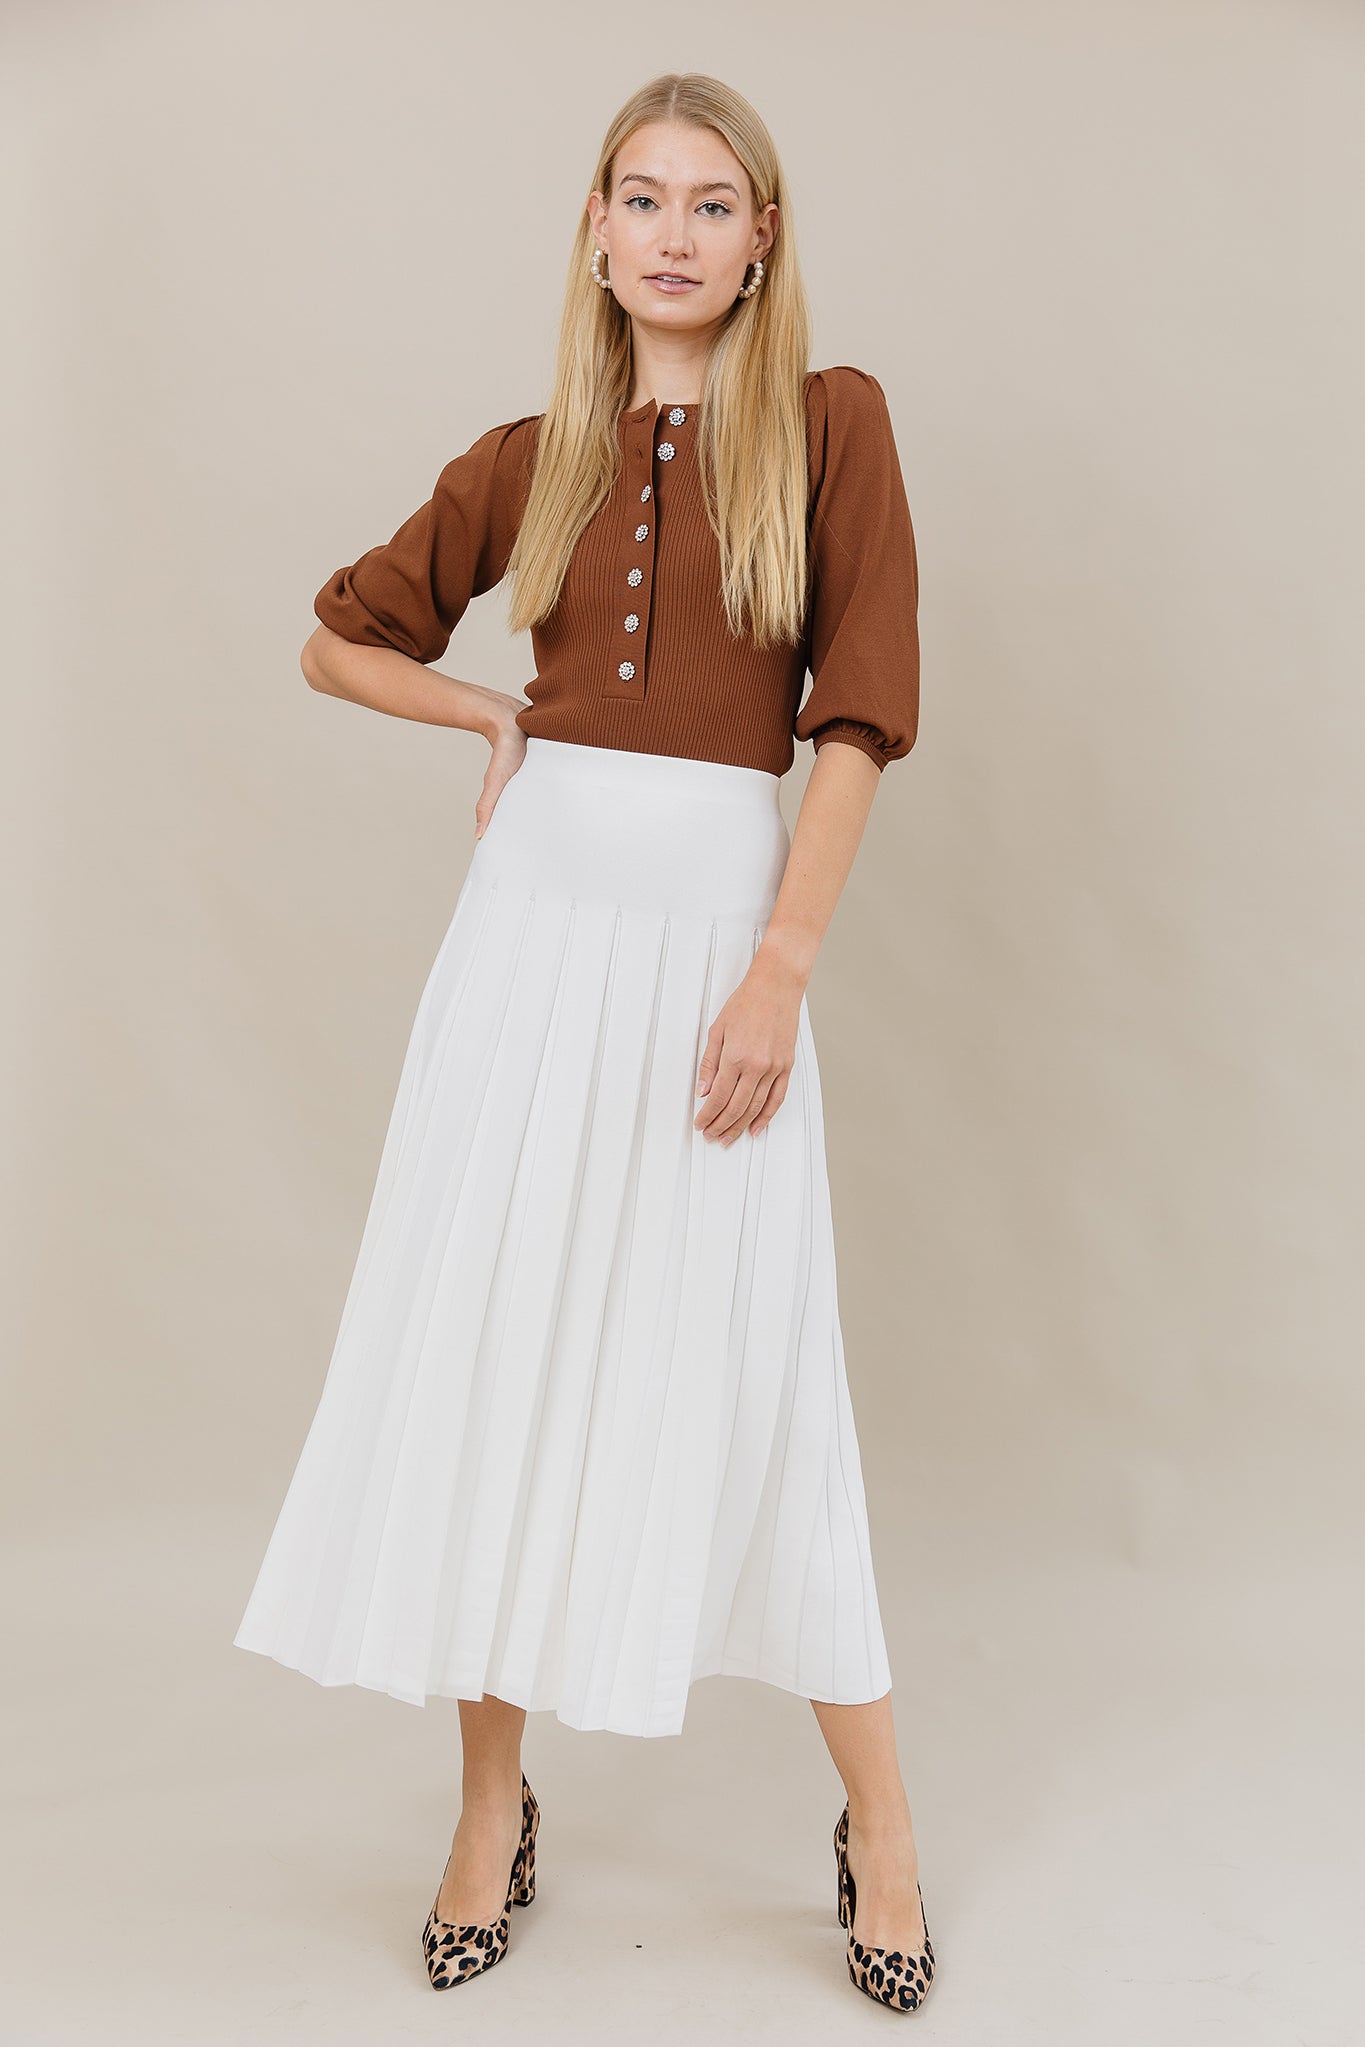 The Maxi Infinity Skirt in Soft White